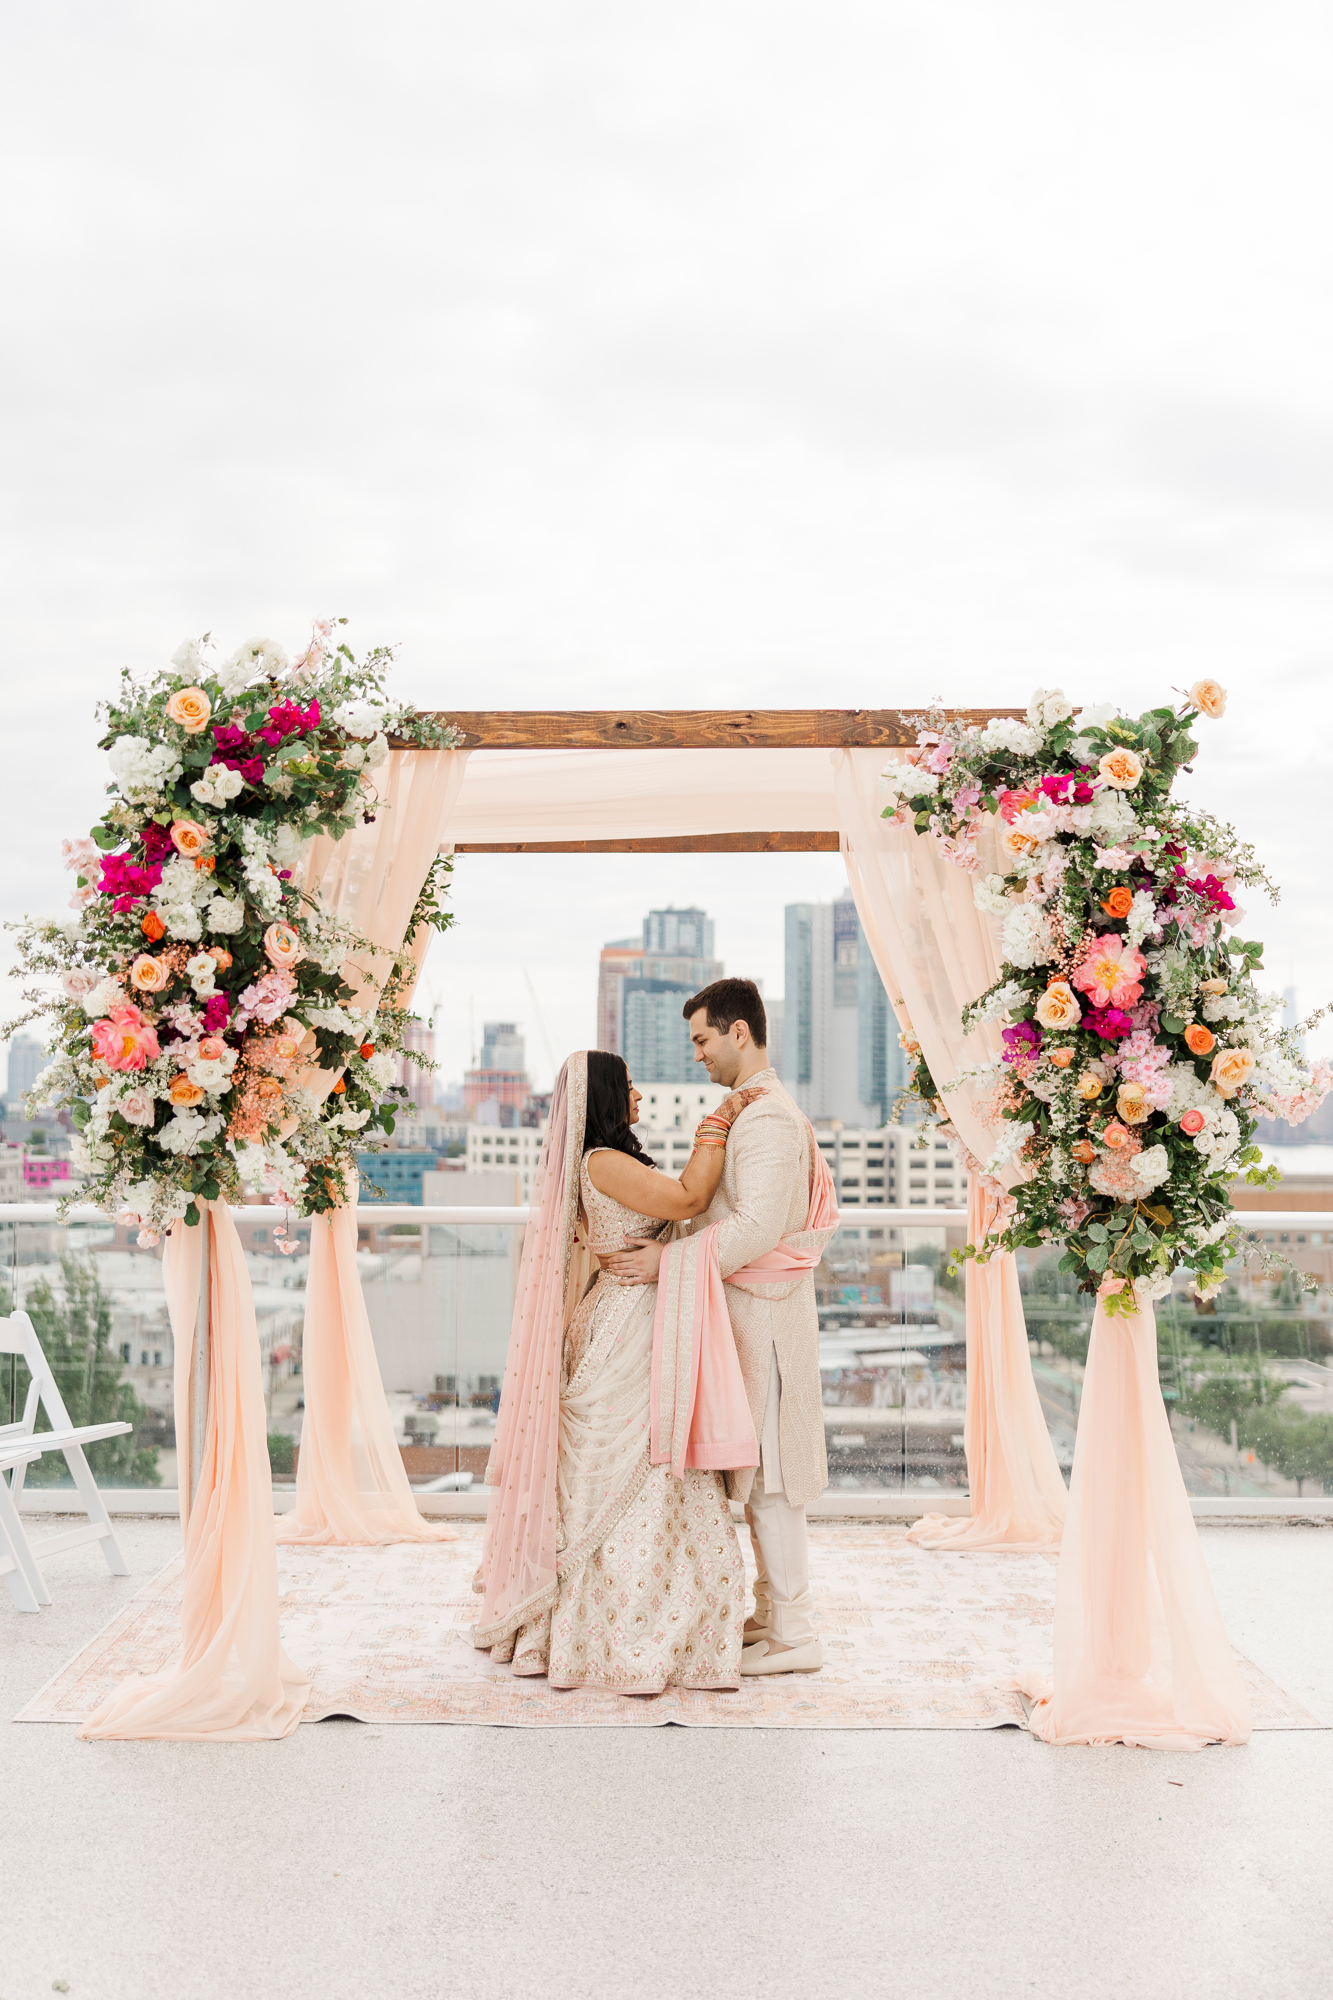 Beautiful Ravel Hotel Wedding in a Peachy, Pastel Palette